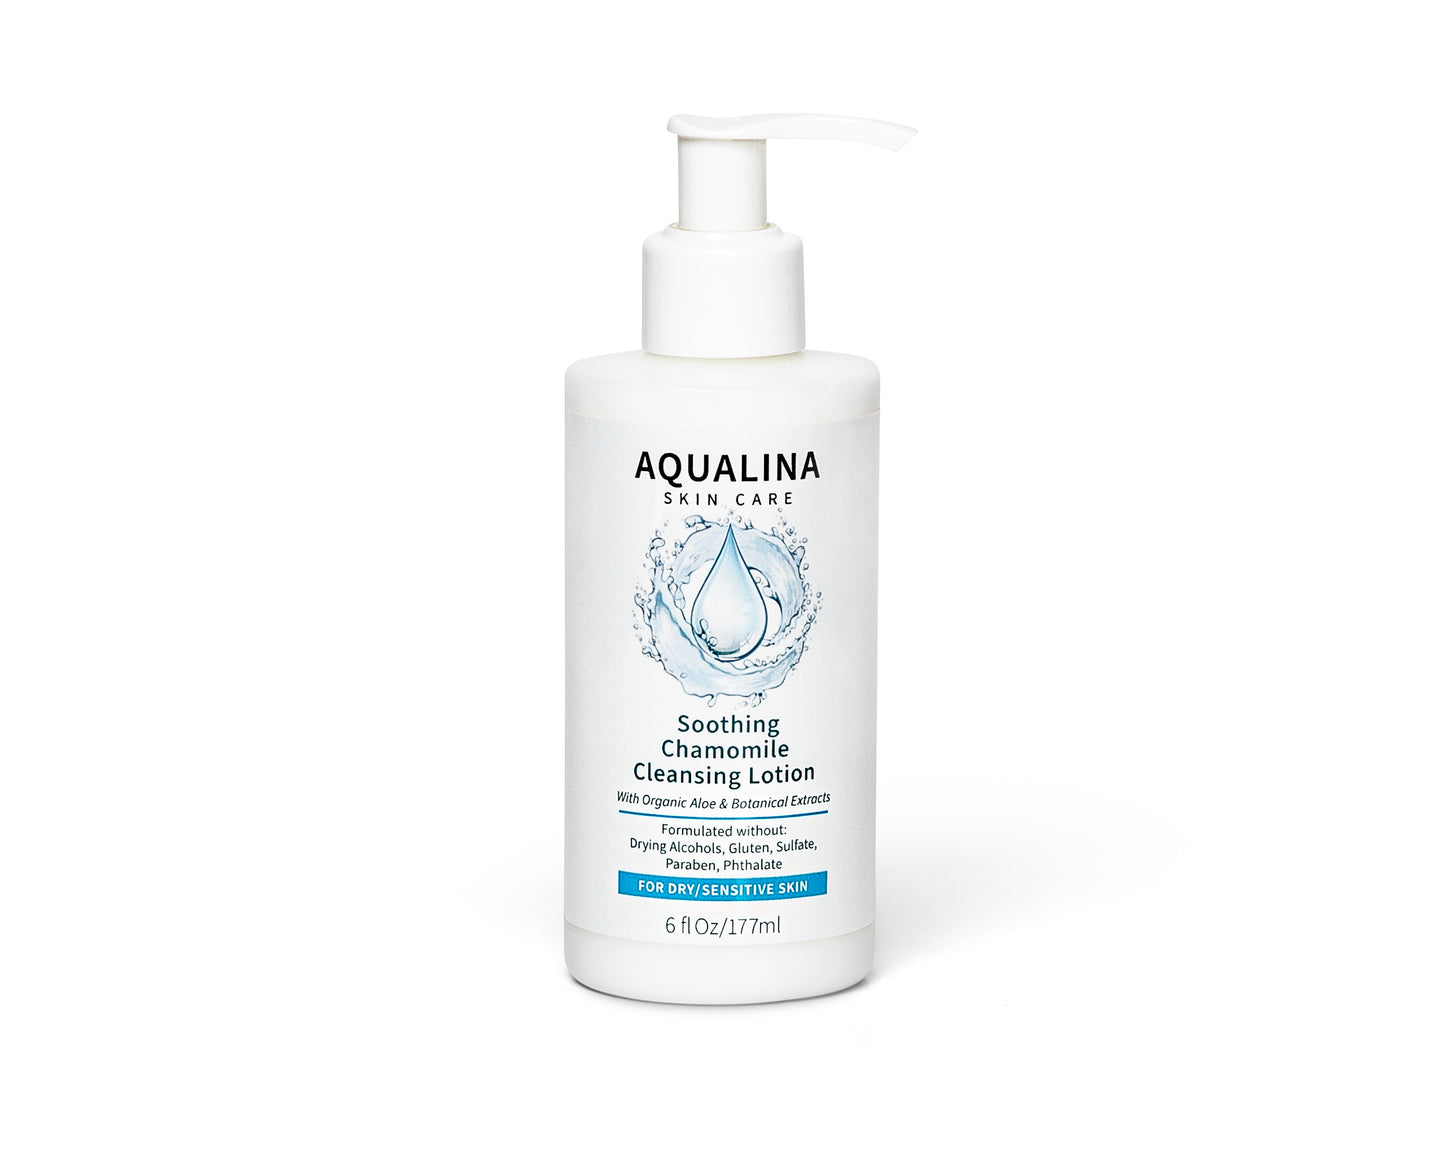 Soothing Chamomile Cleansing Lotion